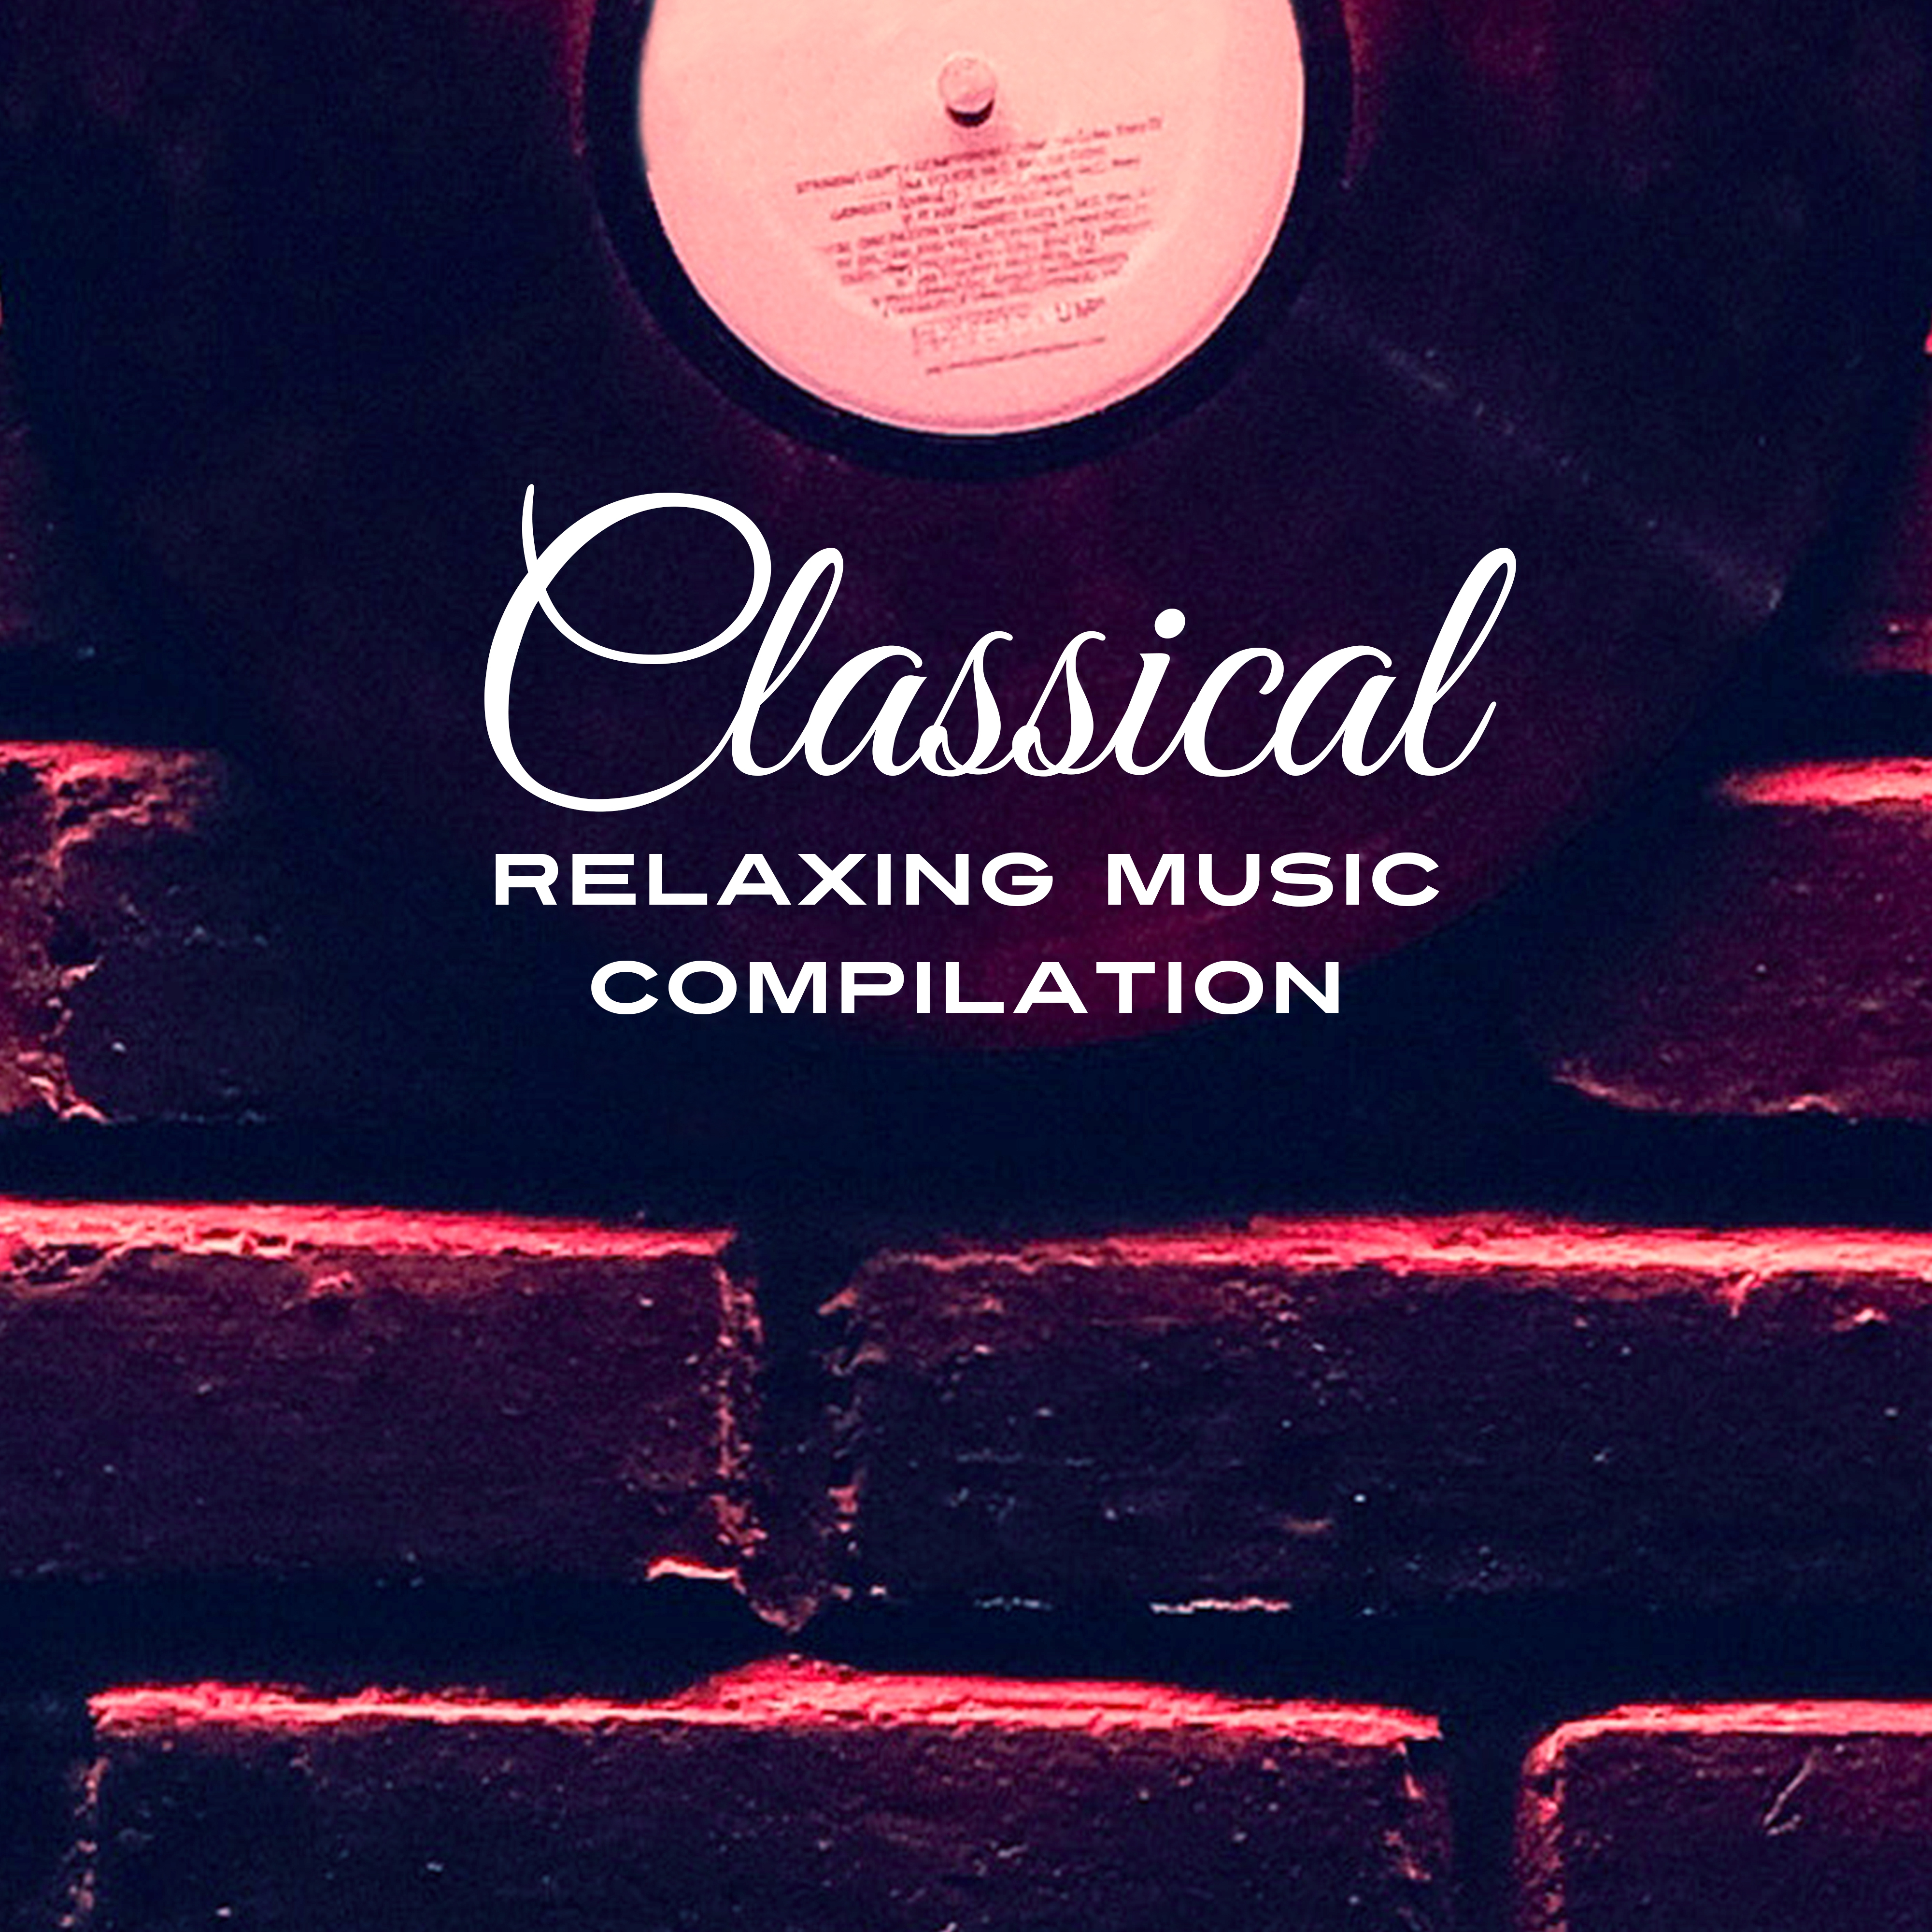 Classical Relaxing Music Compilation